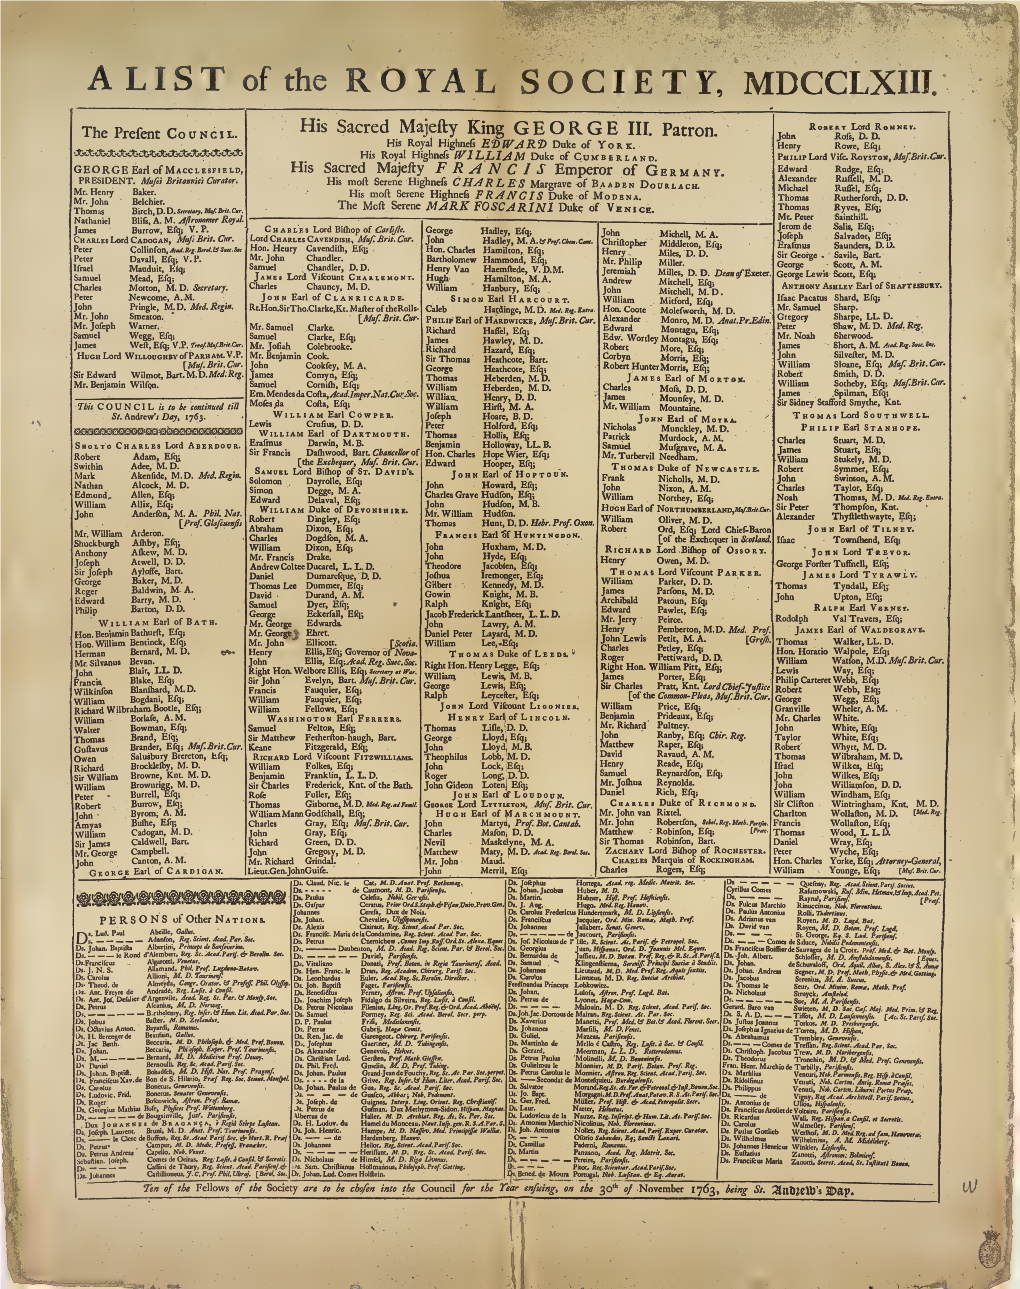 A LIST of the ROYAL SOCIETY, MDCCLXIII